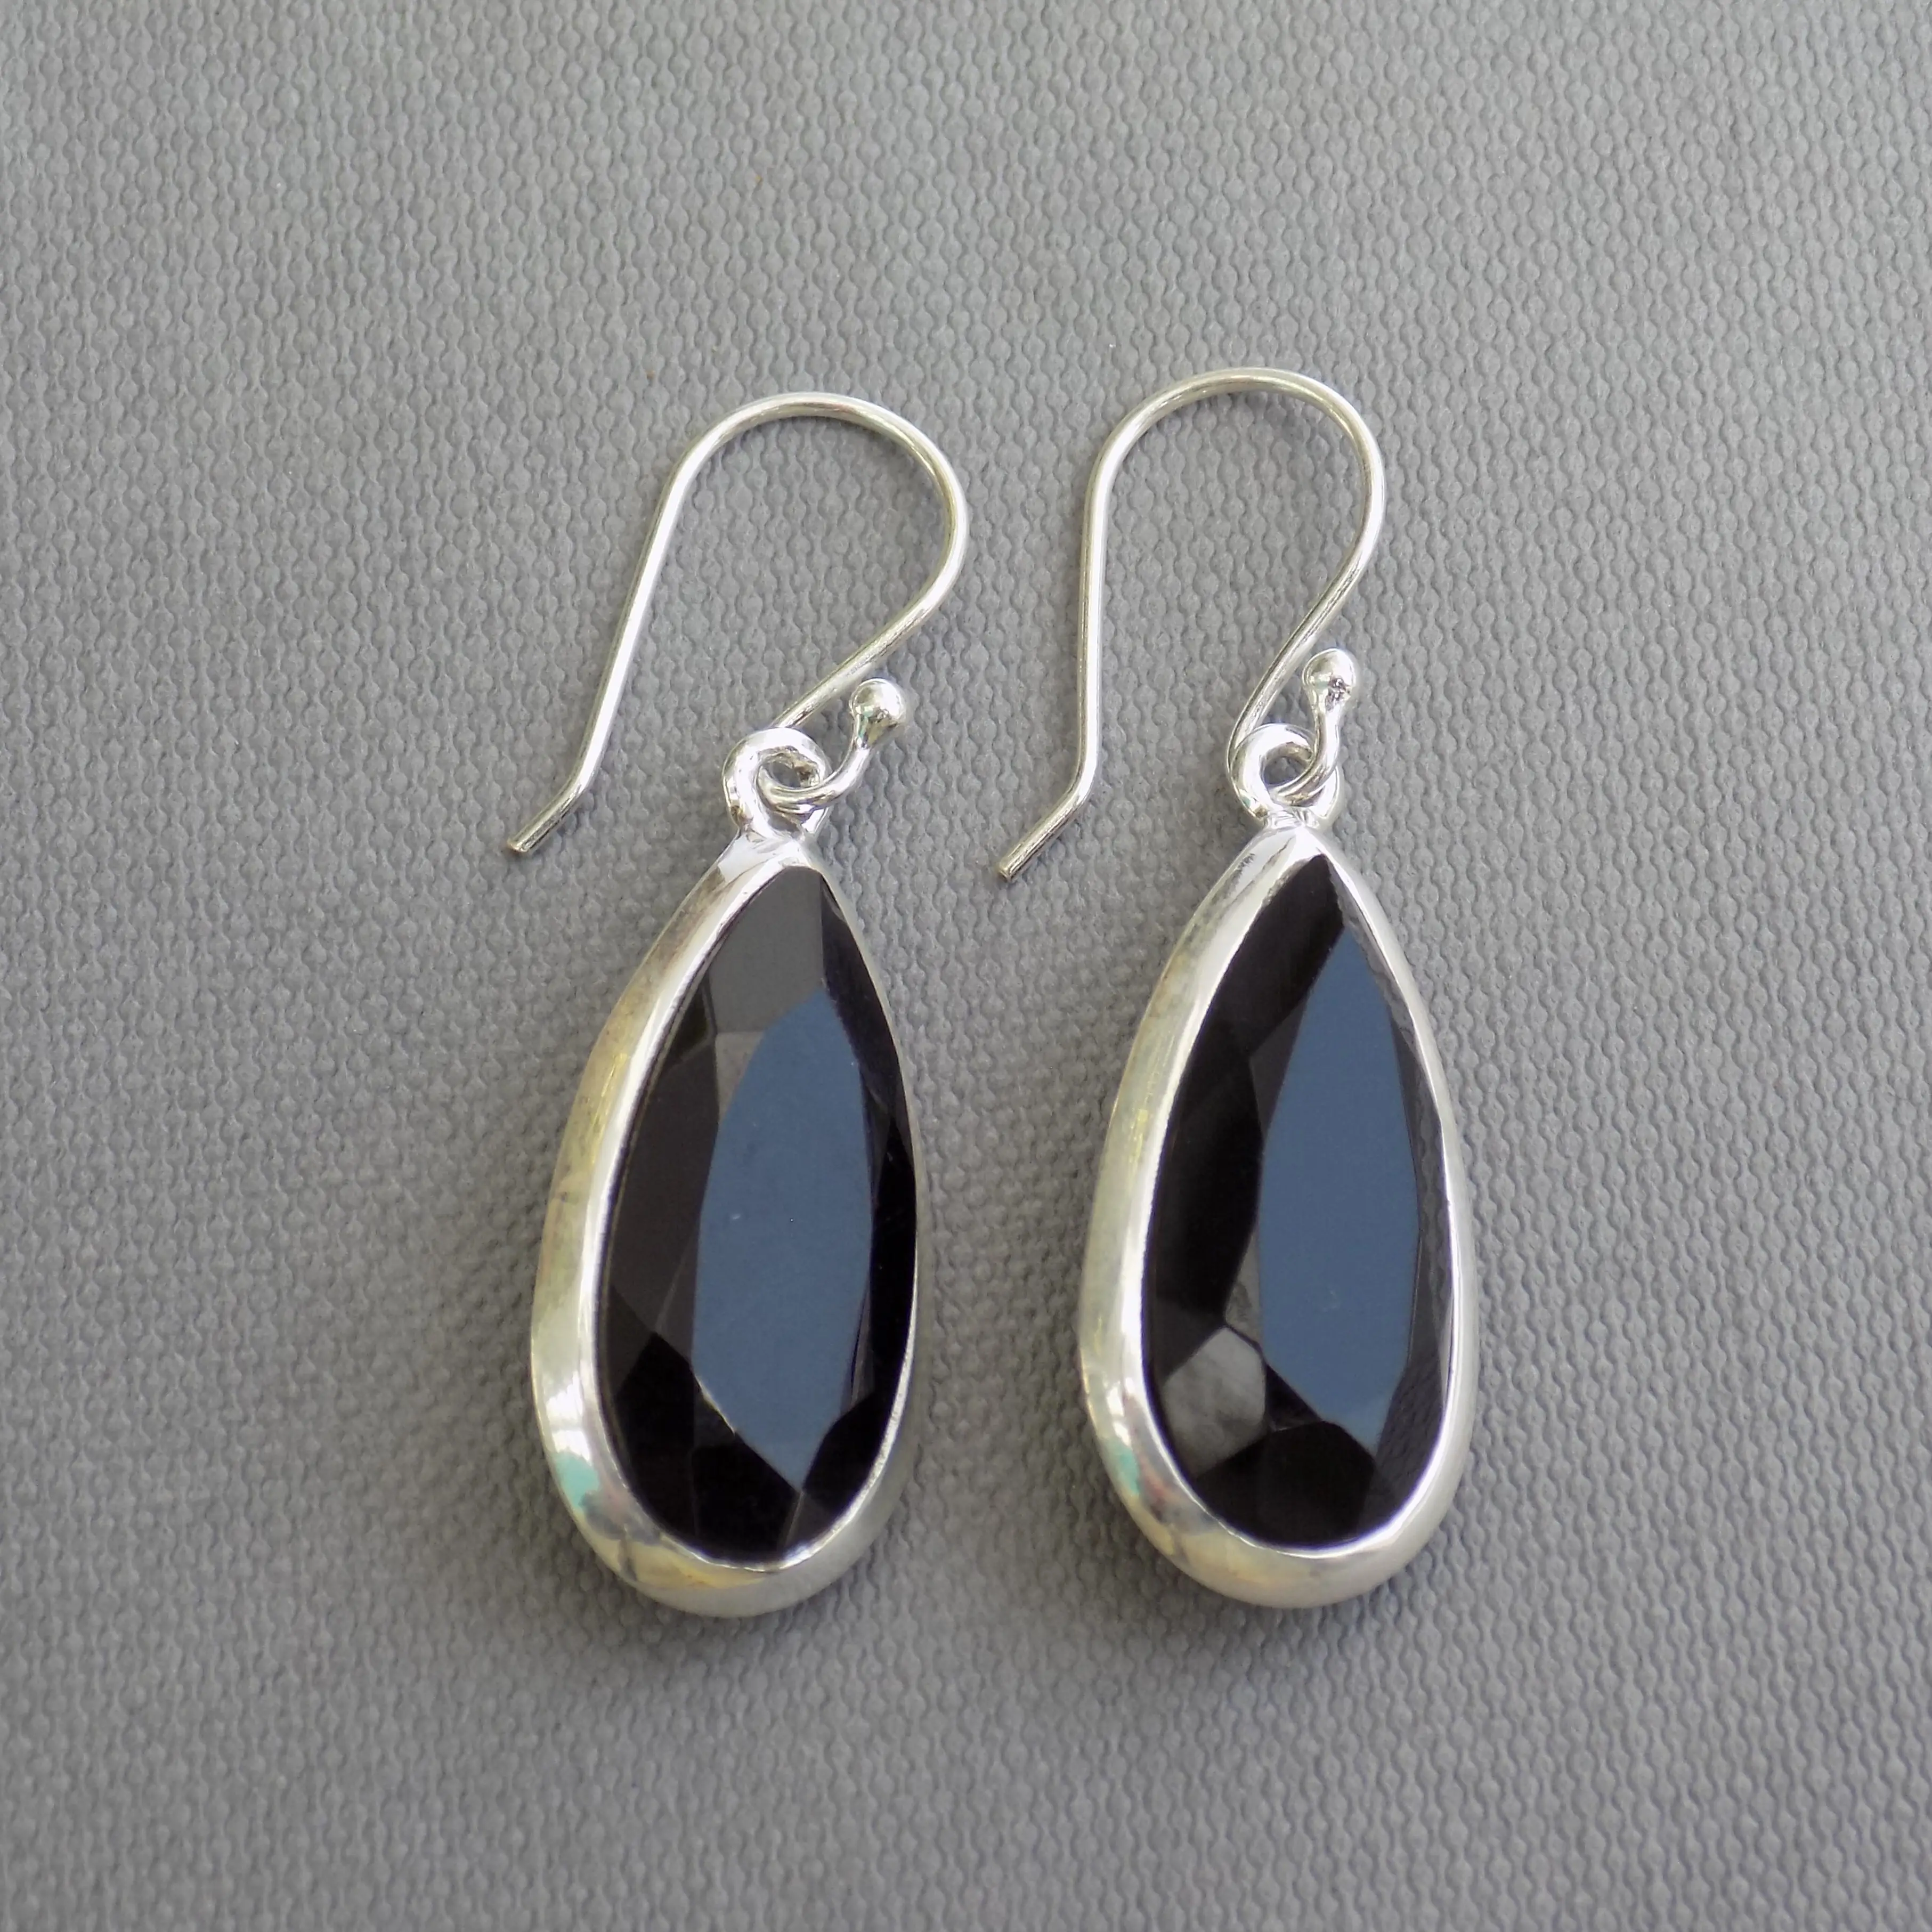 Dangling Long Pear Shape Stone 925 Sterling Silver Scratched/Brushed Metal Finishing Handmade Top Quality Gemstone Drop Earrings